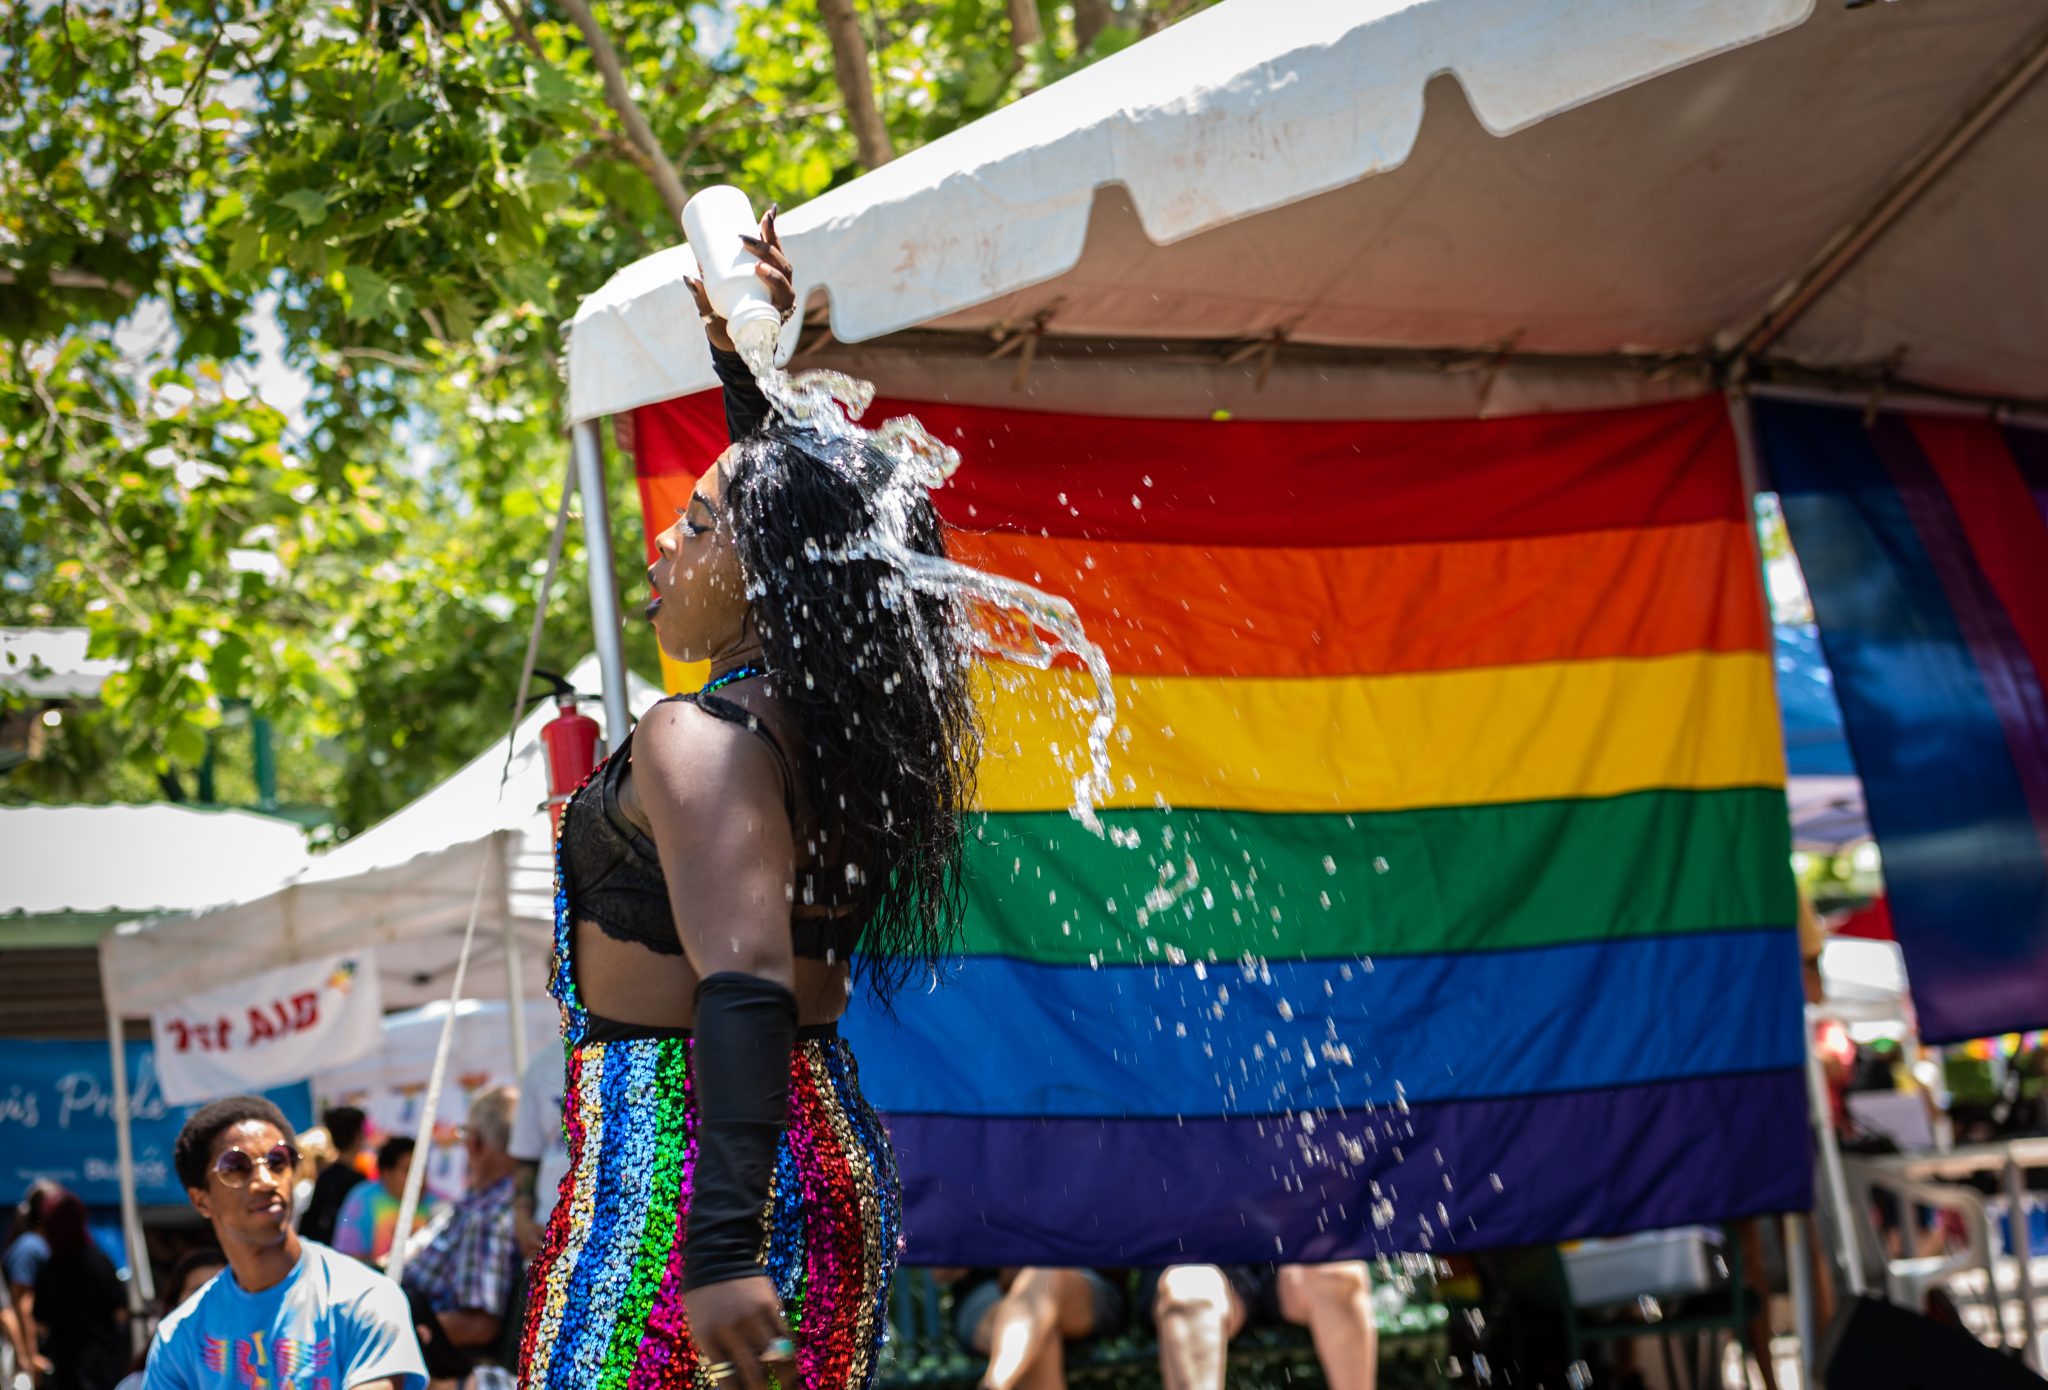 Xena CyberGoth, pouring water on herself, davis pride, davis, california, pride month, gay community, event, chris allan, freelance photojournalist, news photography, lgbtq, event, colorful